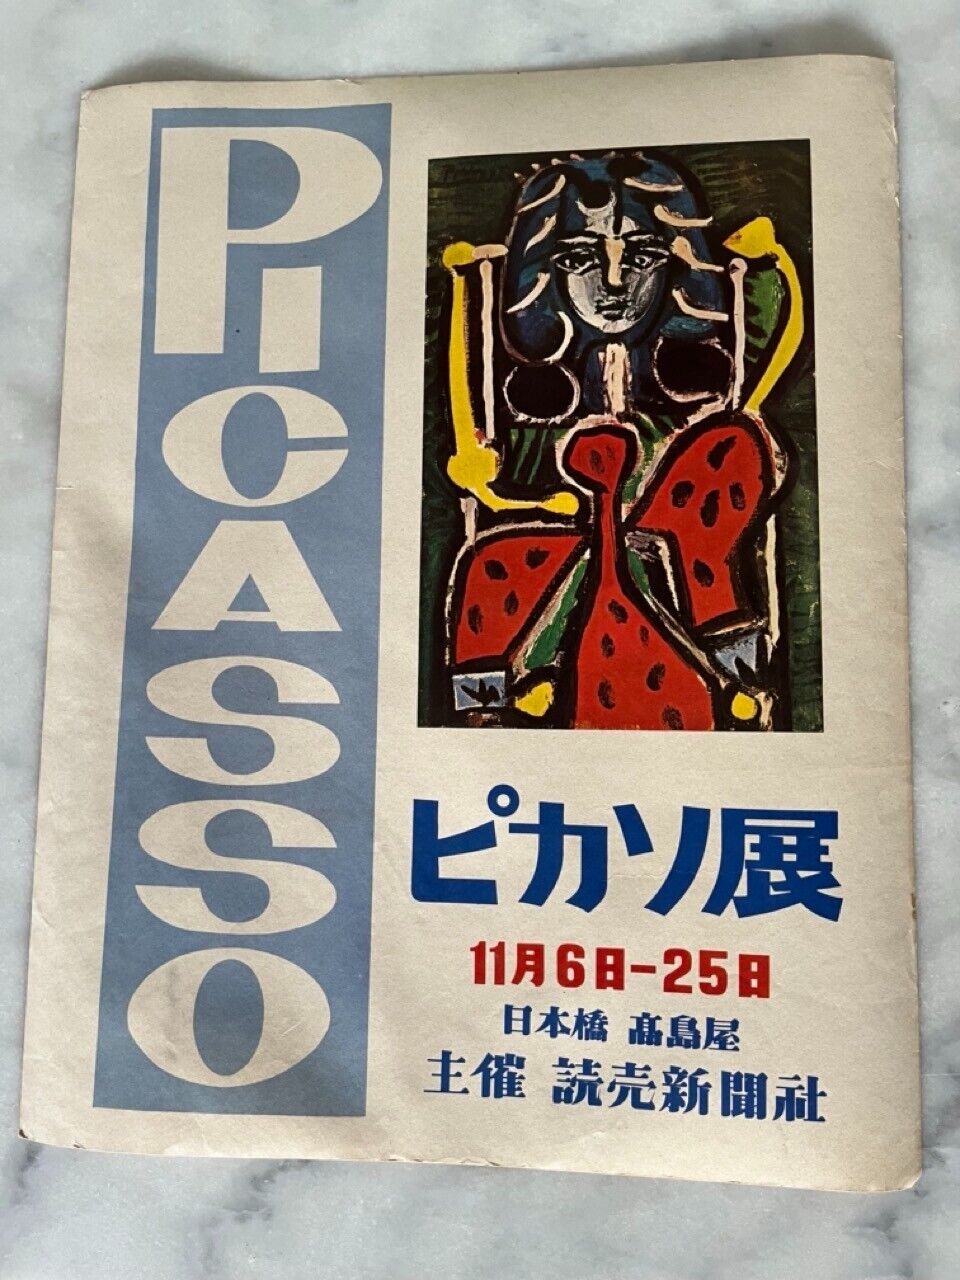 Vintage Kanji Poster, Museum Society - Pablo Picasso Exhibition - 50.5 x 40cm